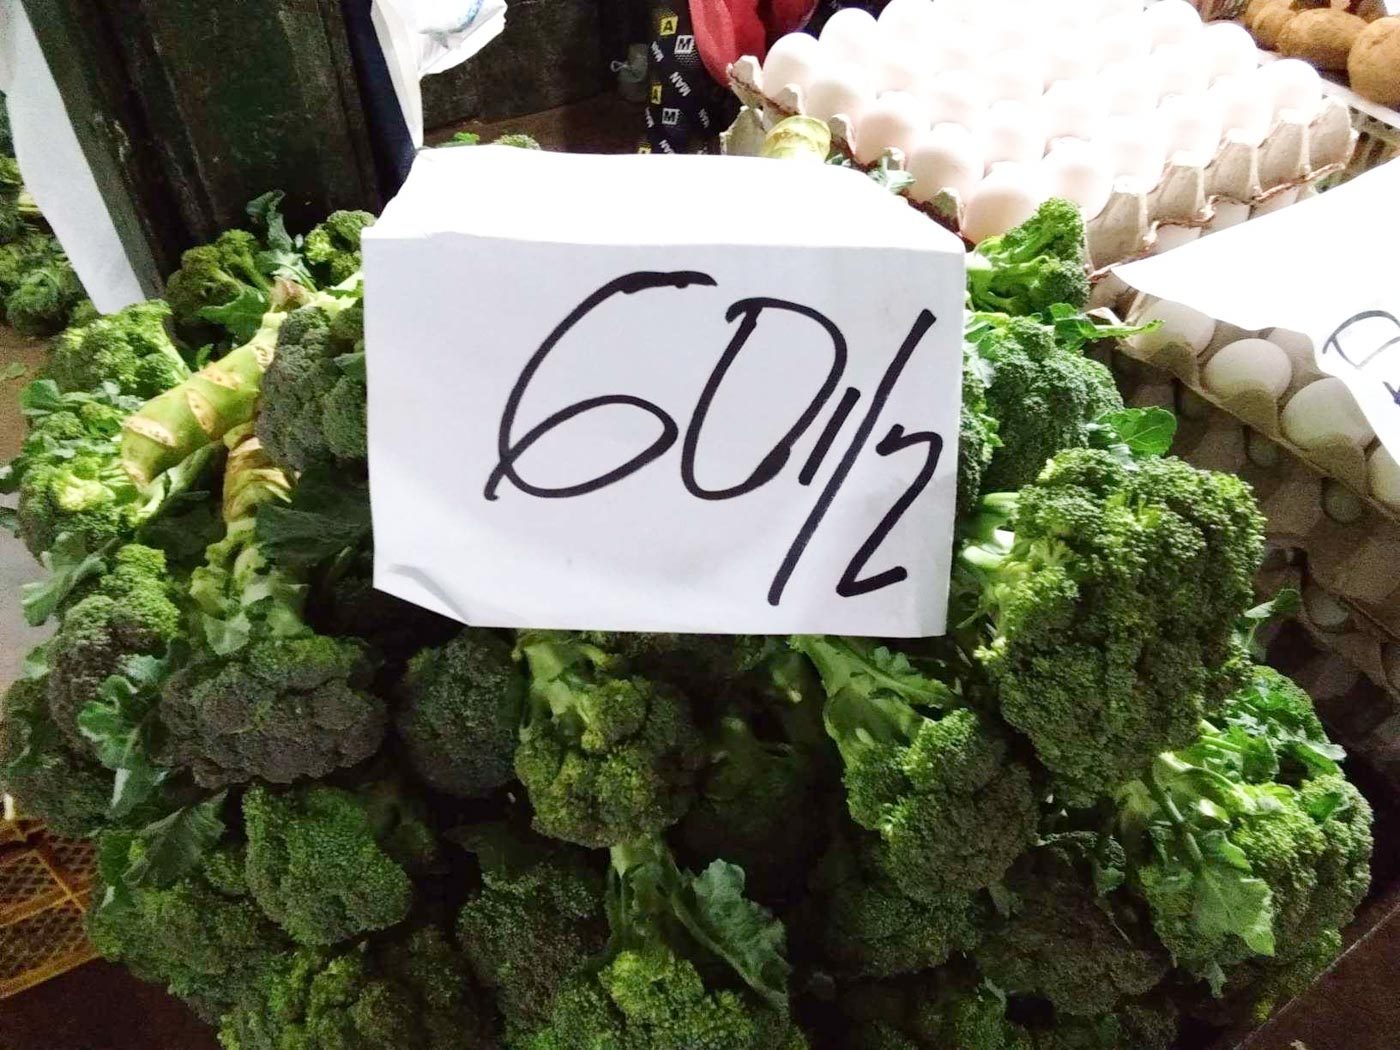 IN PHOTOS: Vegetable prices go down in Benguet as rain eases